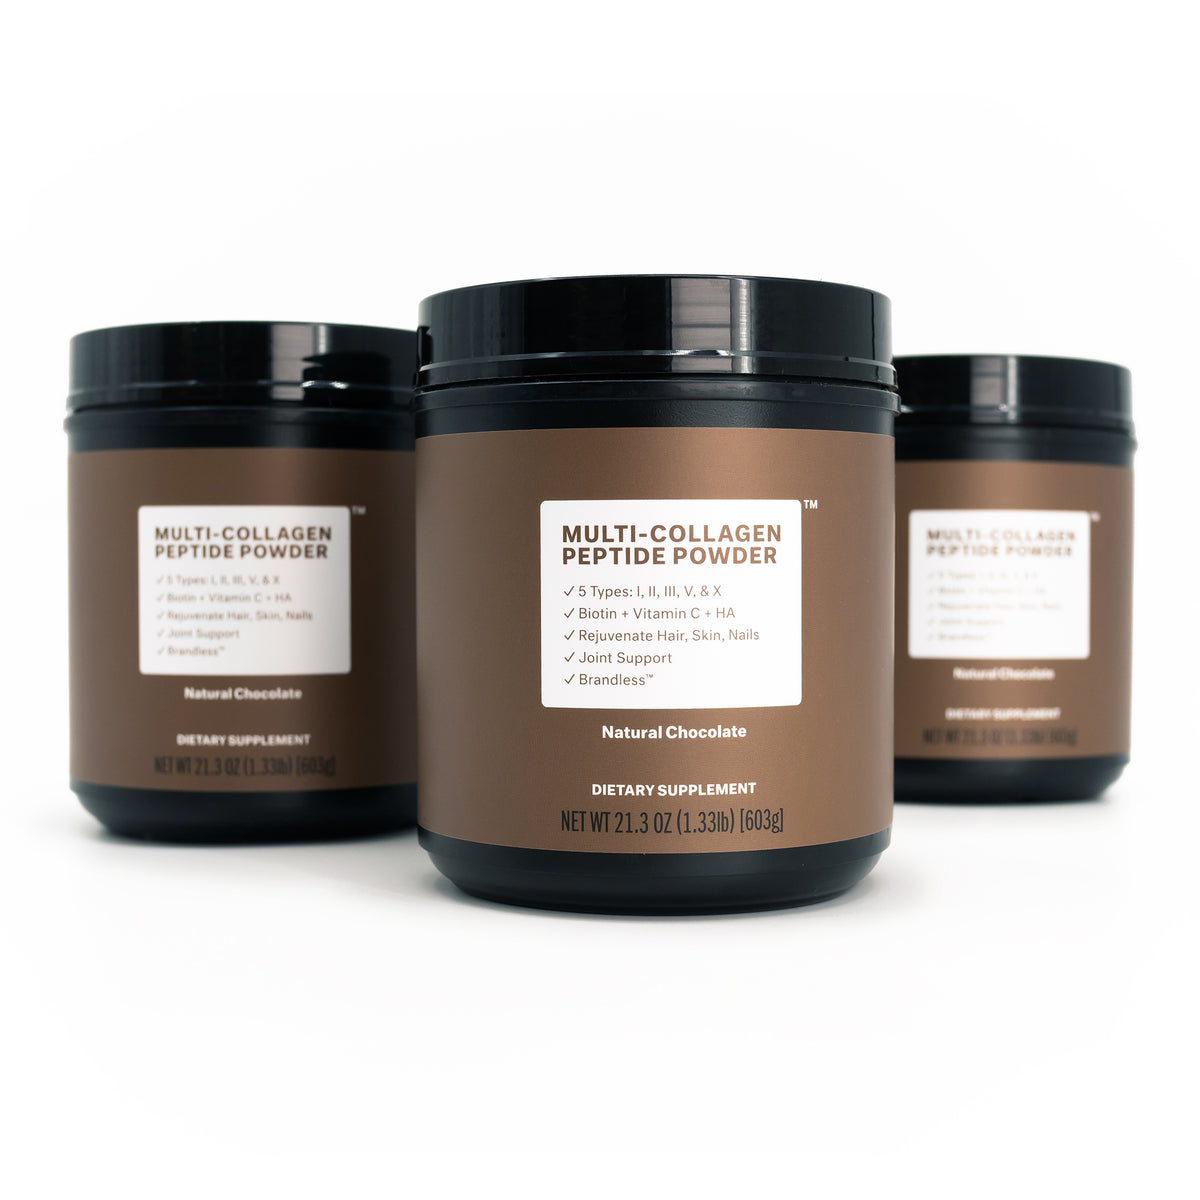 Product photo, front view of three chocolate multi-collagen peptide powder tubs arranged in a triangle.